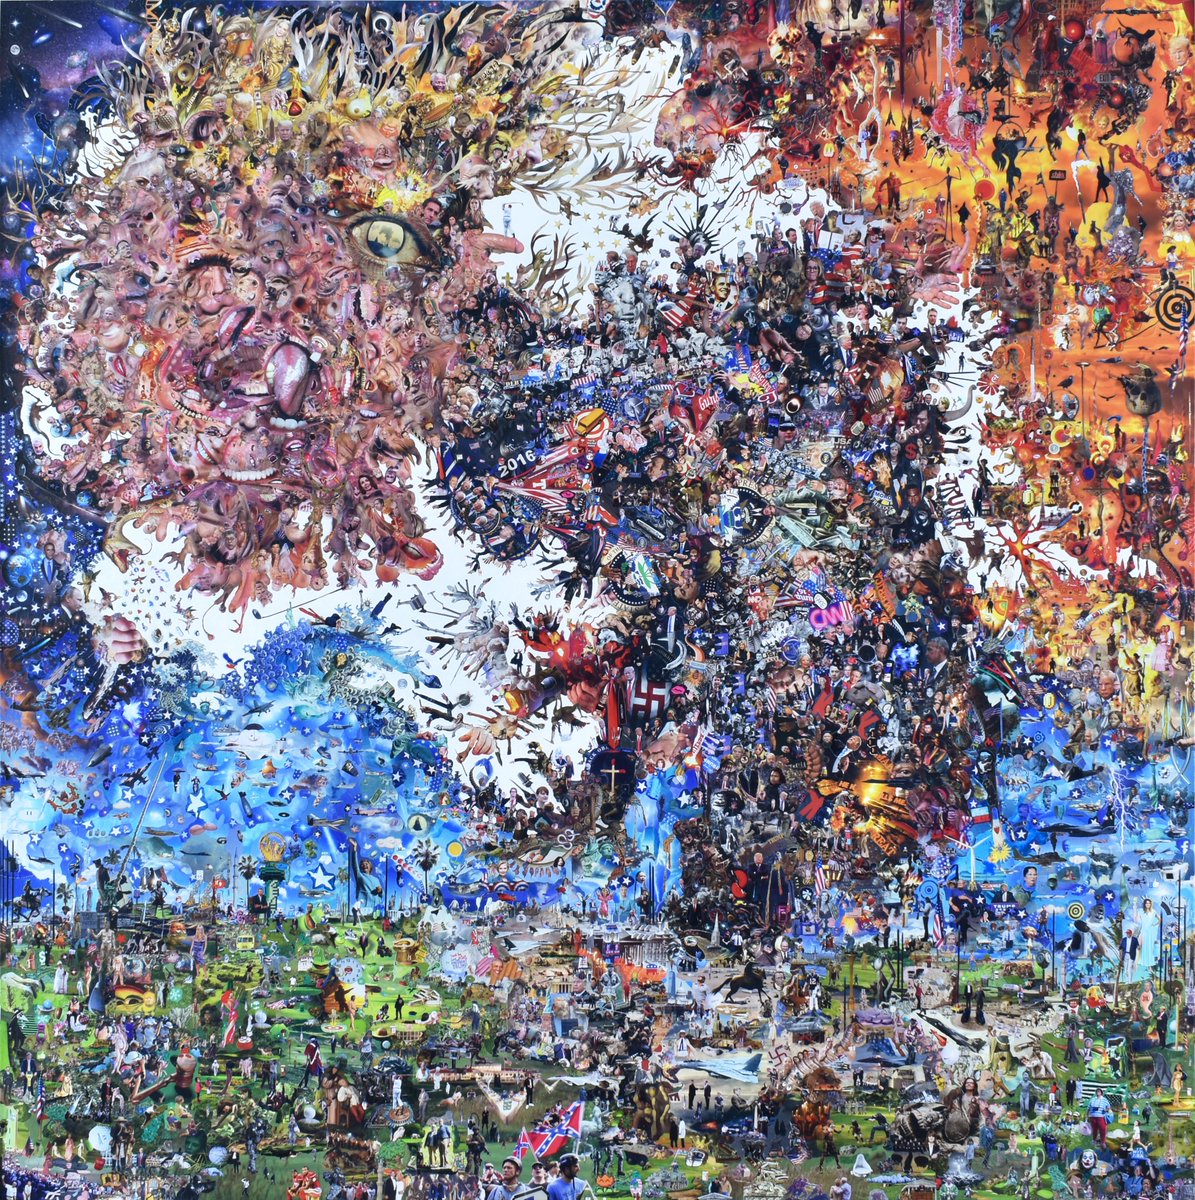 For the past 3 years I've been working on this big paper collage (6 x 6 feet, all torn/cut by hand). It’s essentially a portrait of Donald J. Trump as President of the United States.This thread is about some of the ideas, sources, and references that inform it.